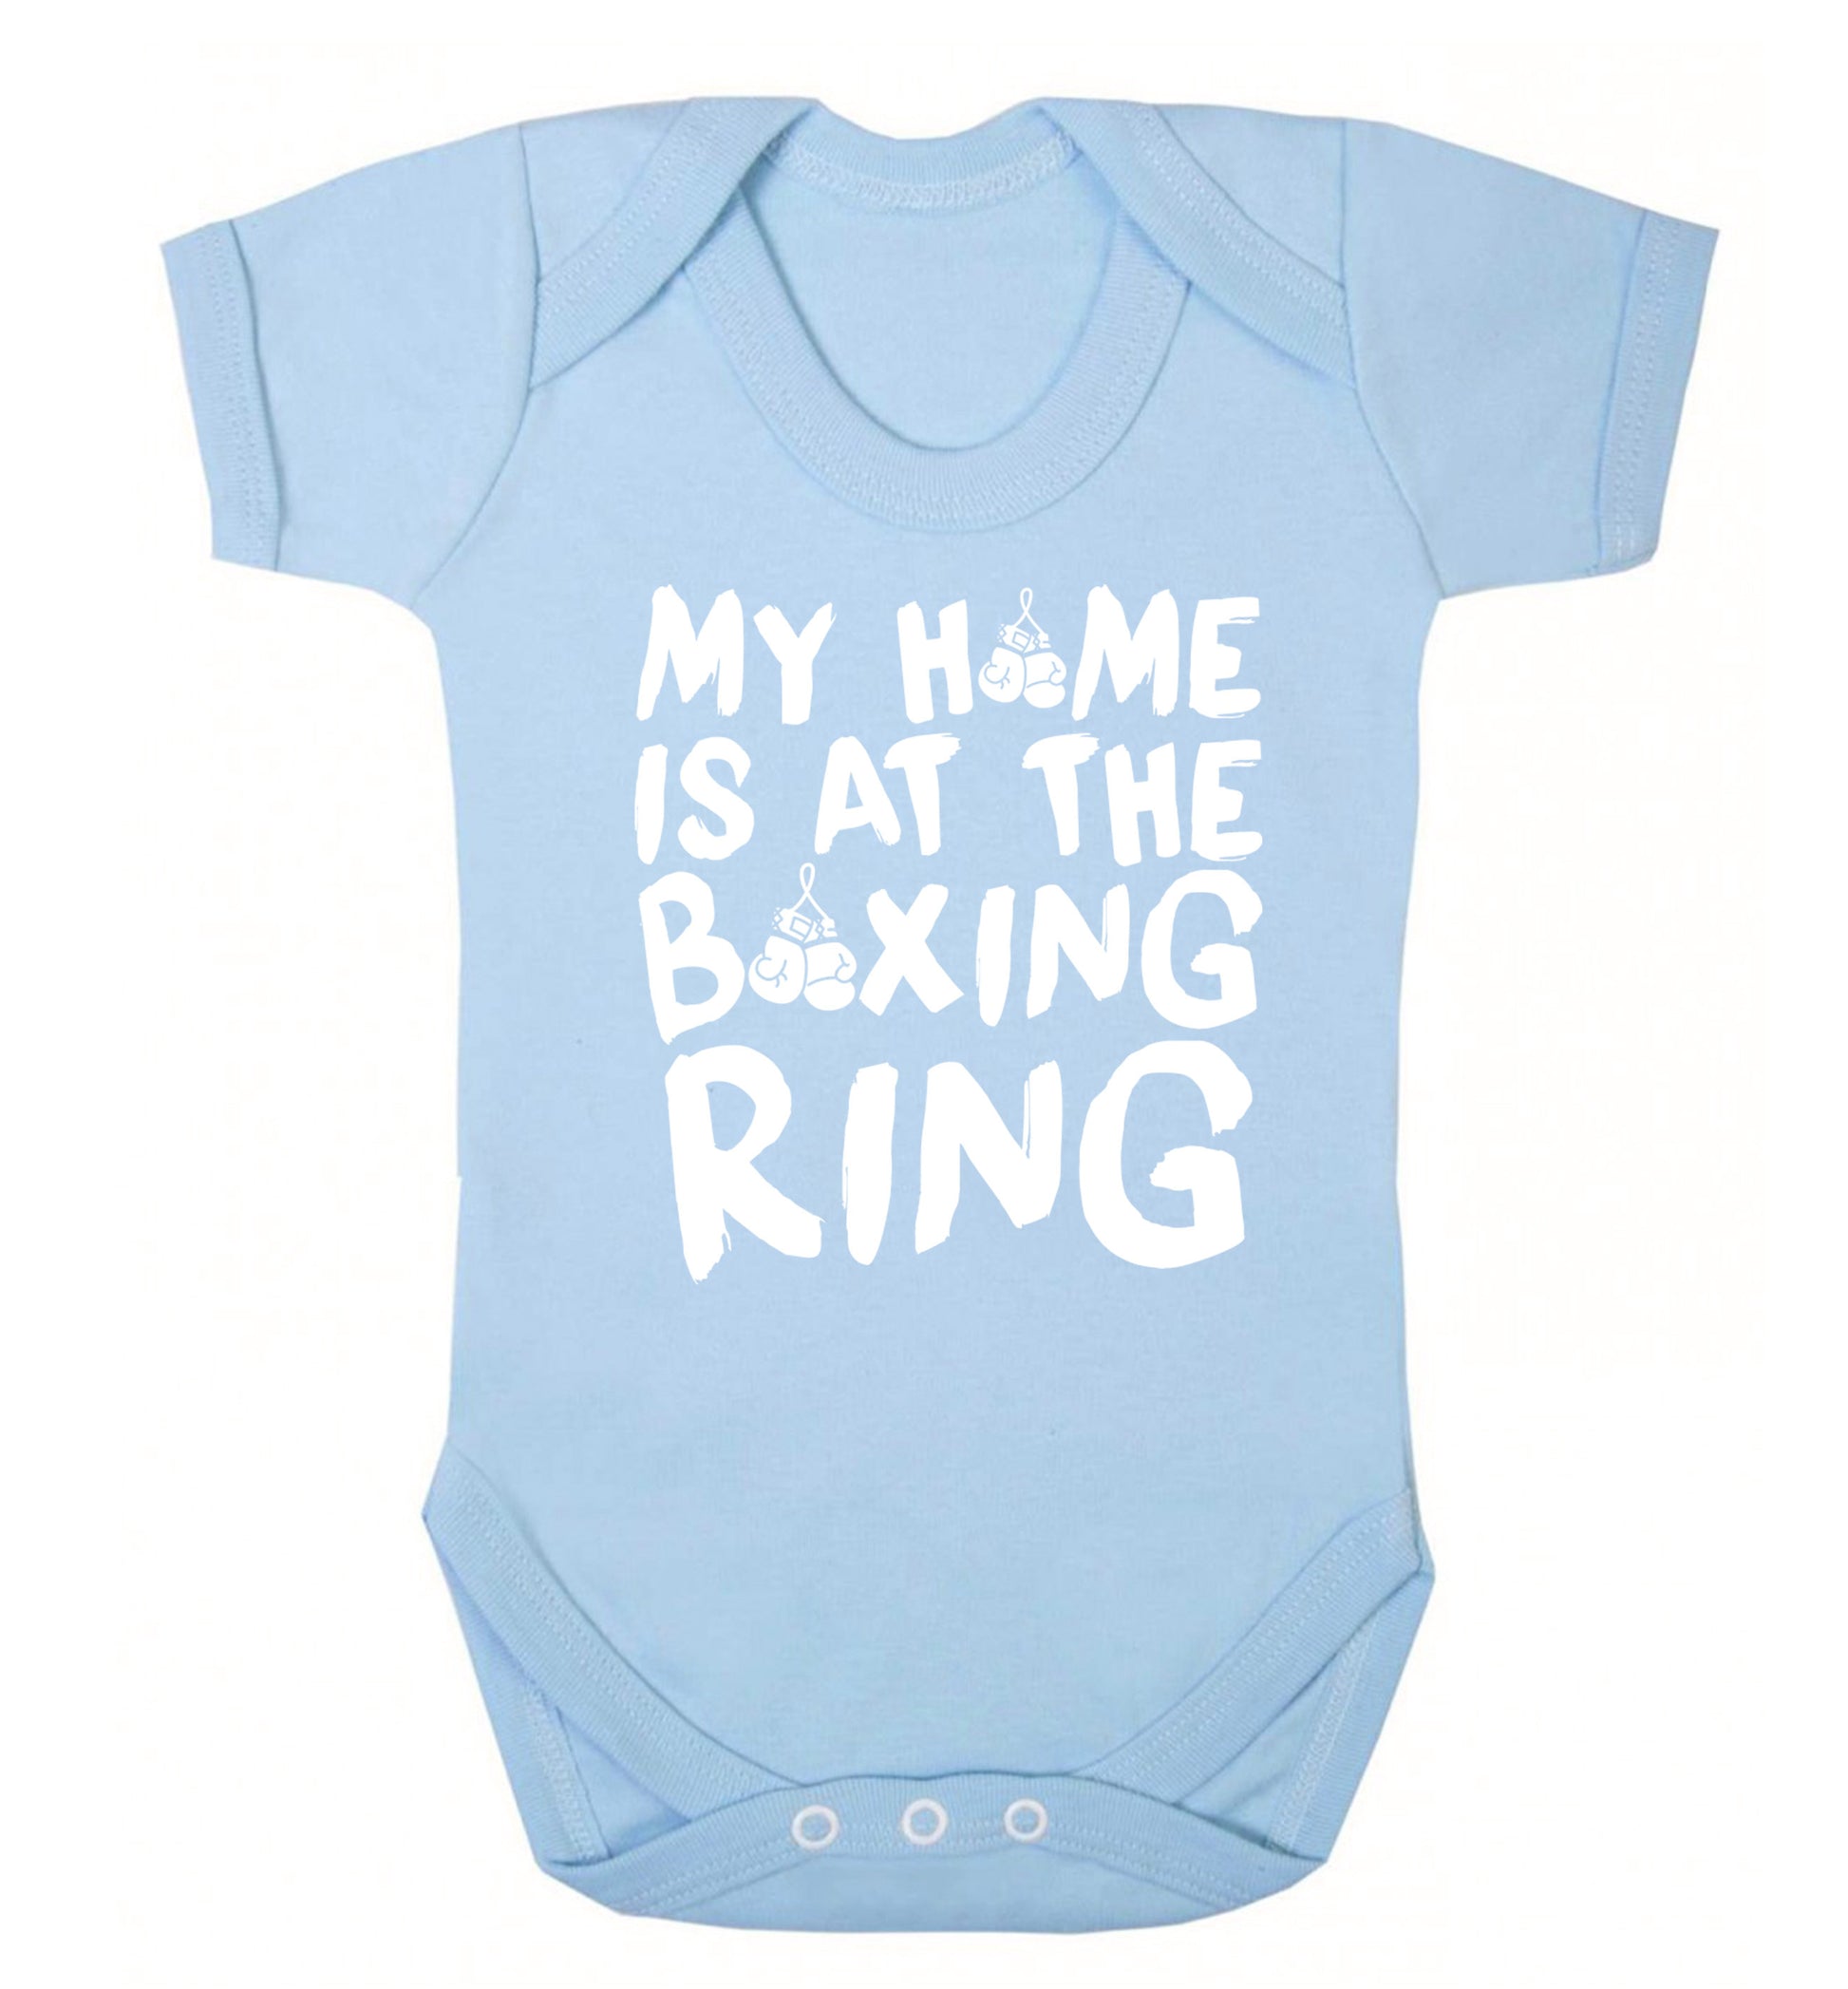 My home is at the boxing ring Baby Vest pale blue 18-24 months